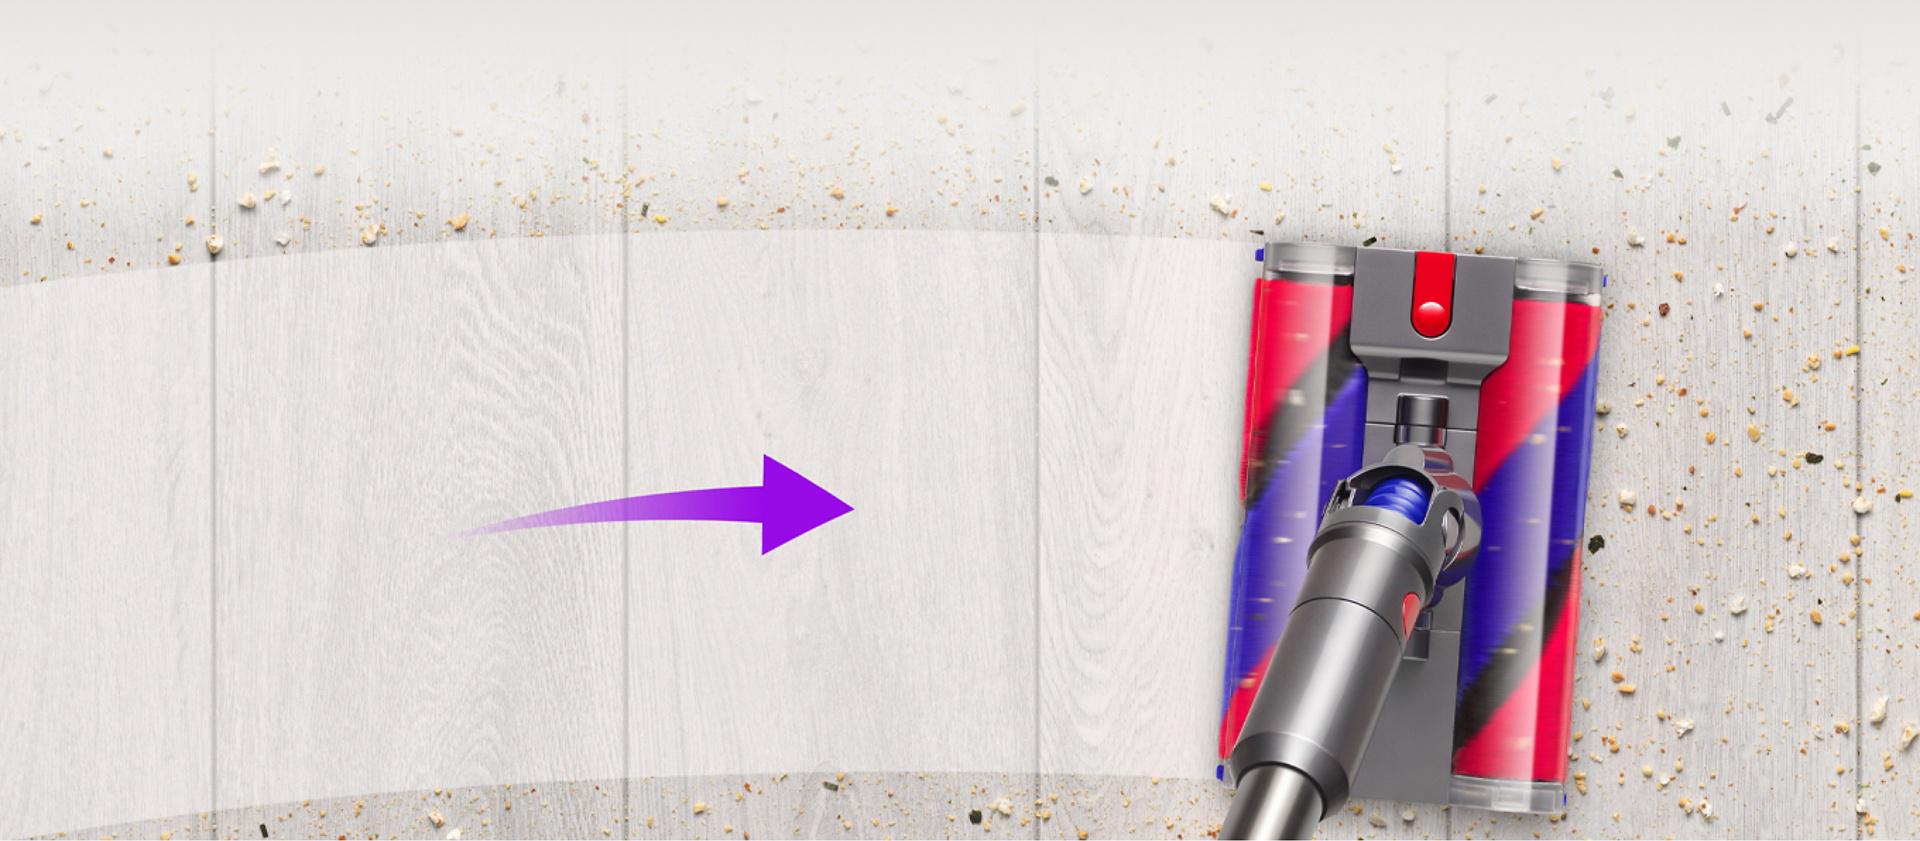 Dyson's most manoeuvrable cordless vacuum <sup>2</sup>